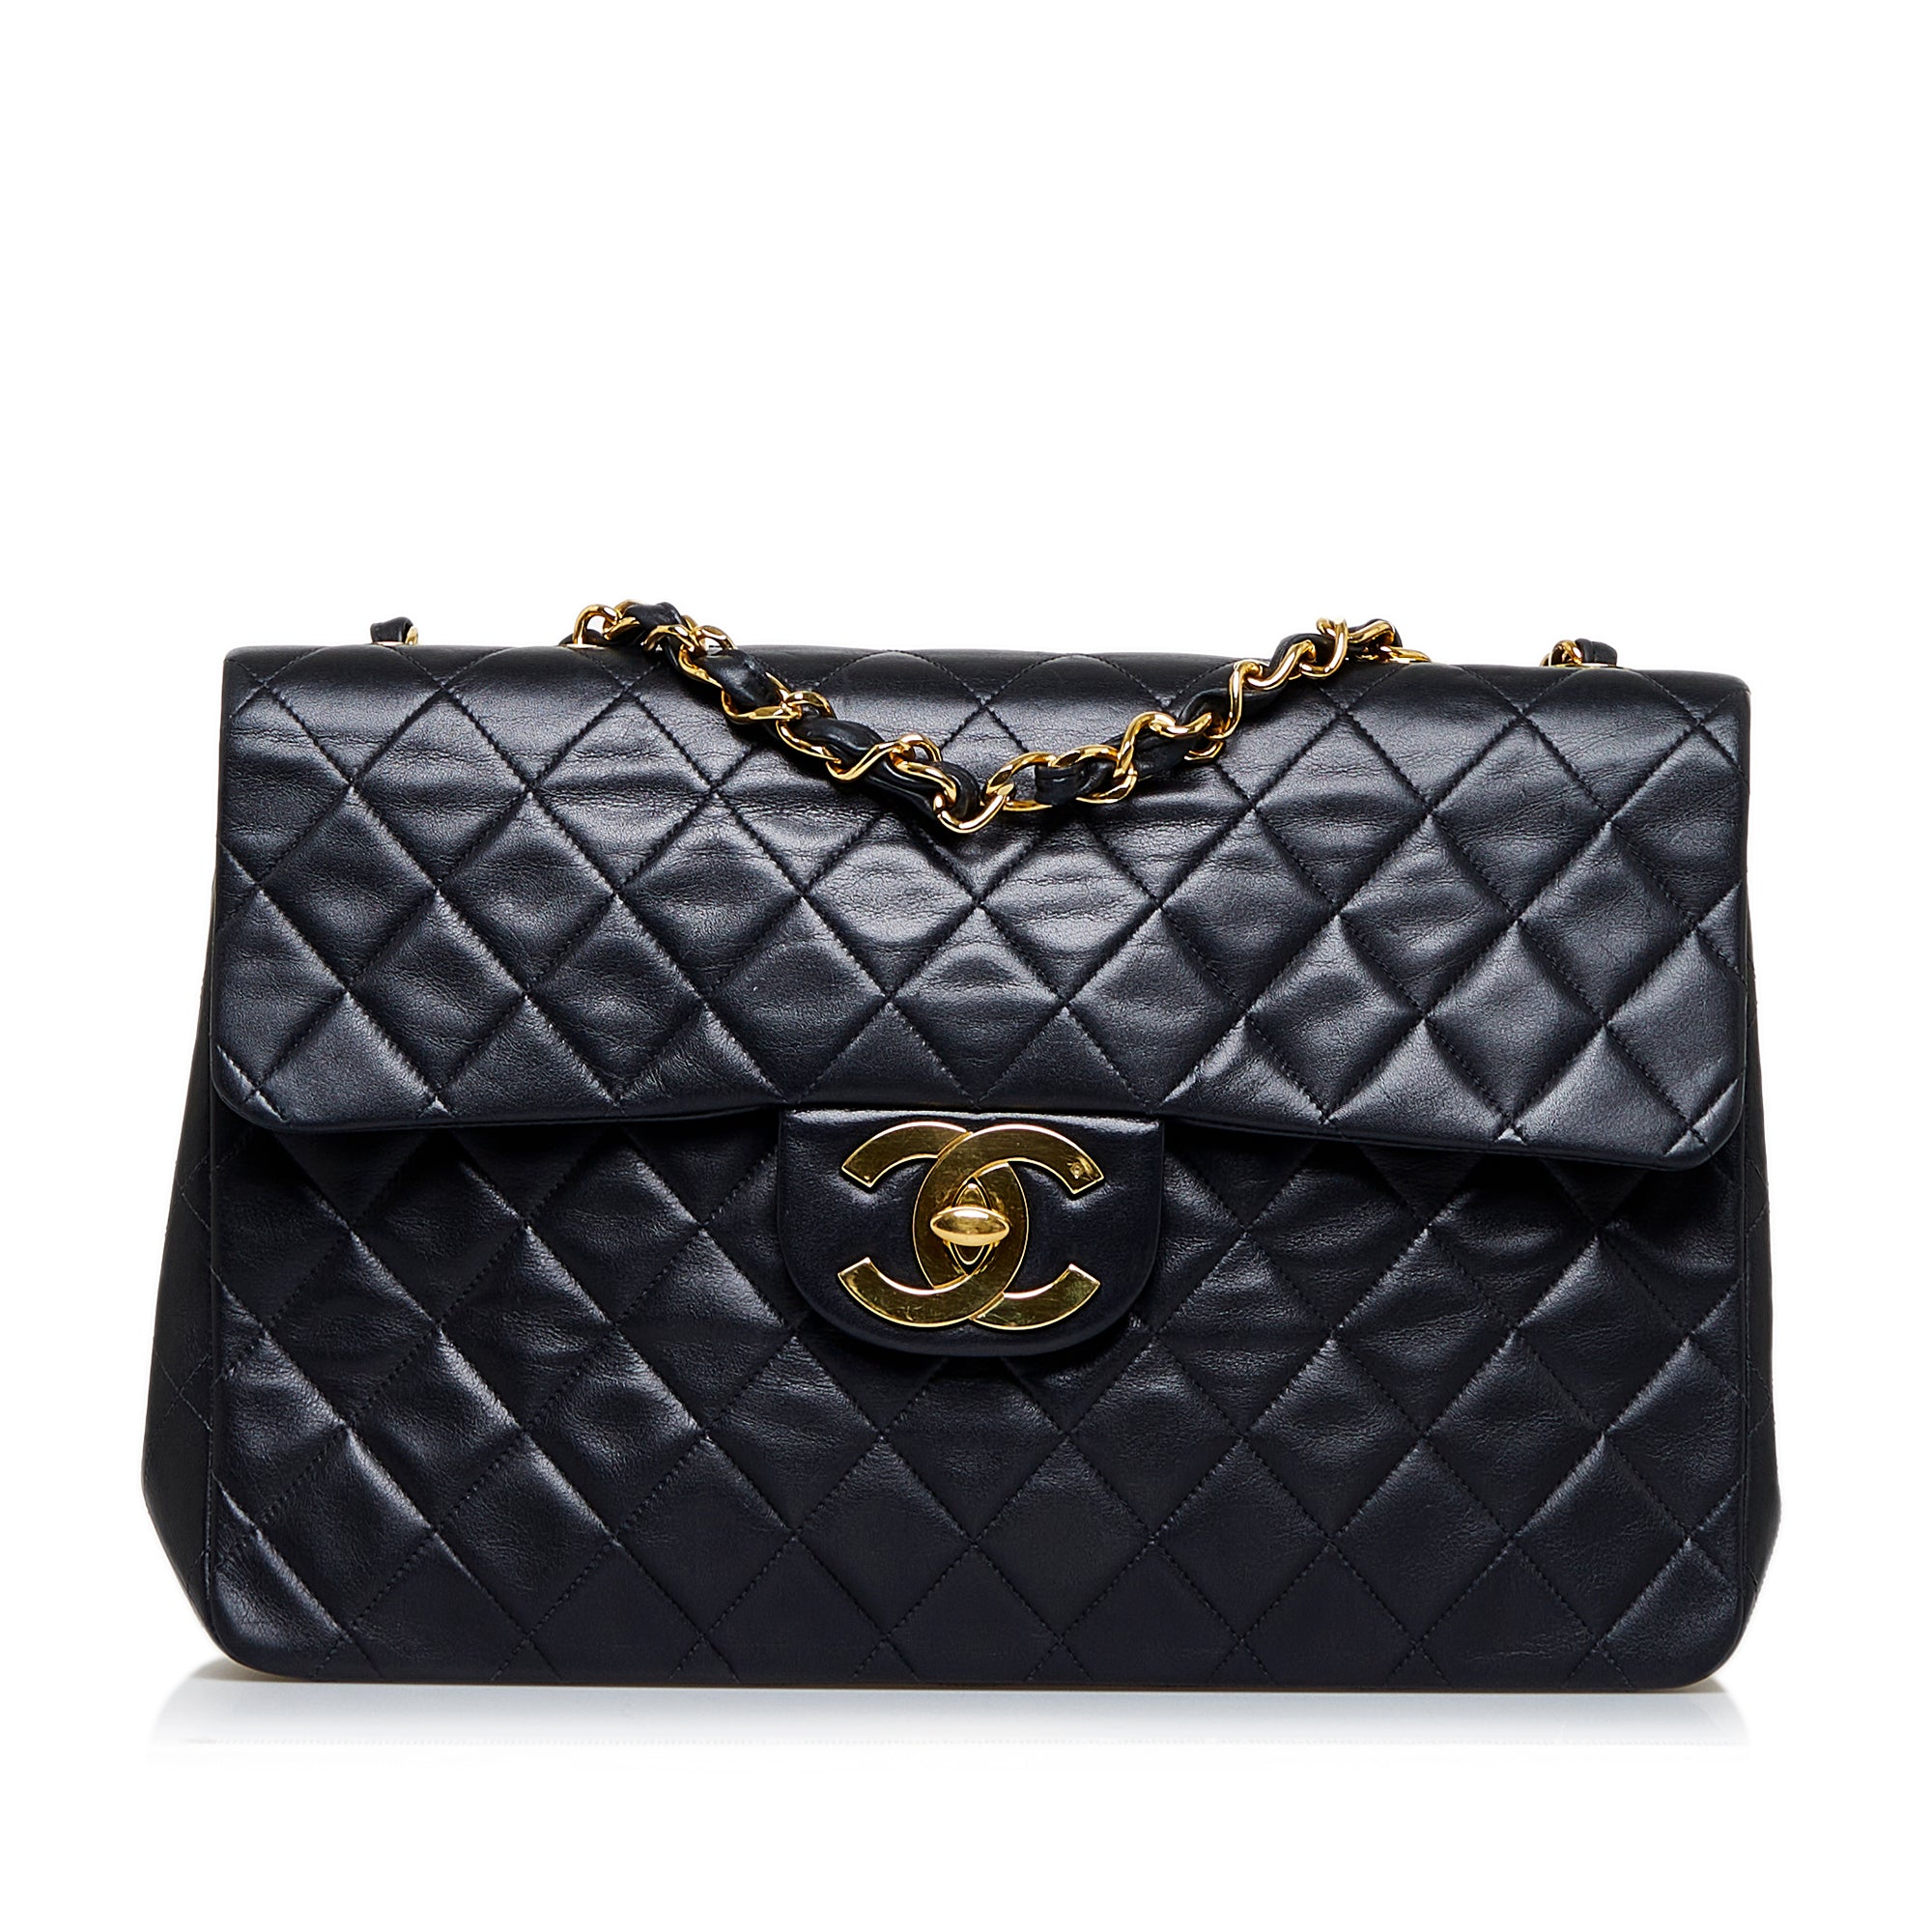 Chanel Pre-Owned 2002 CC twisted strap shoulder bag, ParallaxShops